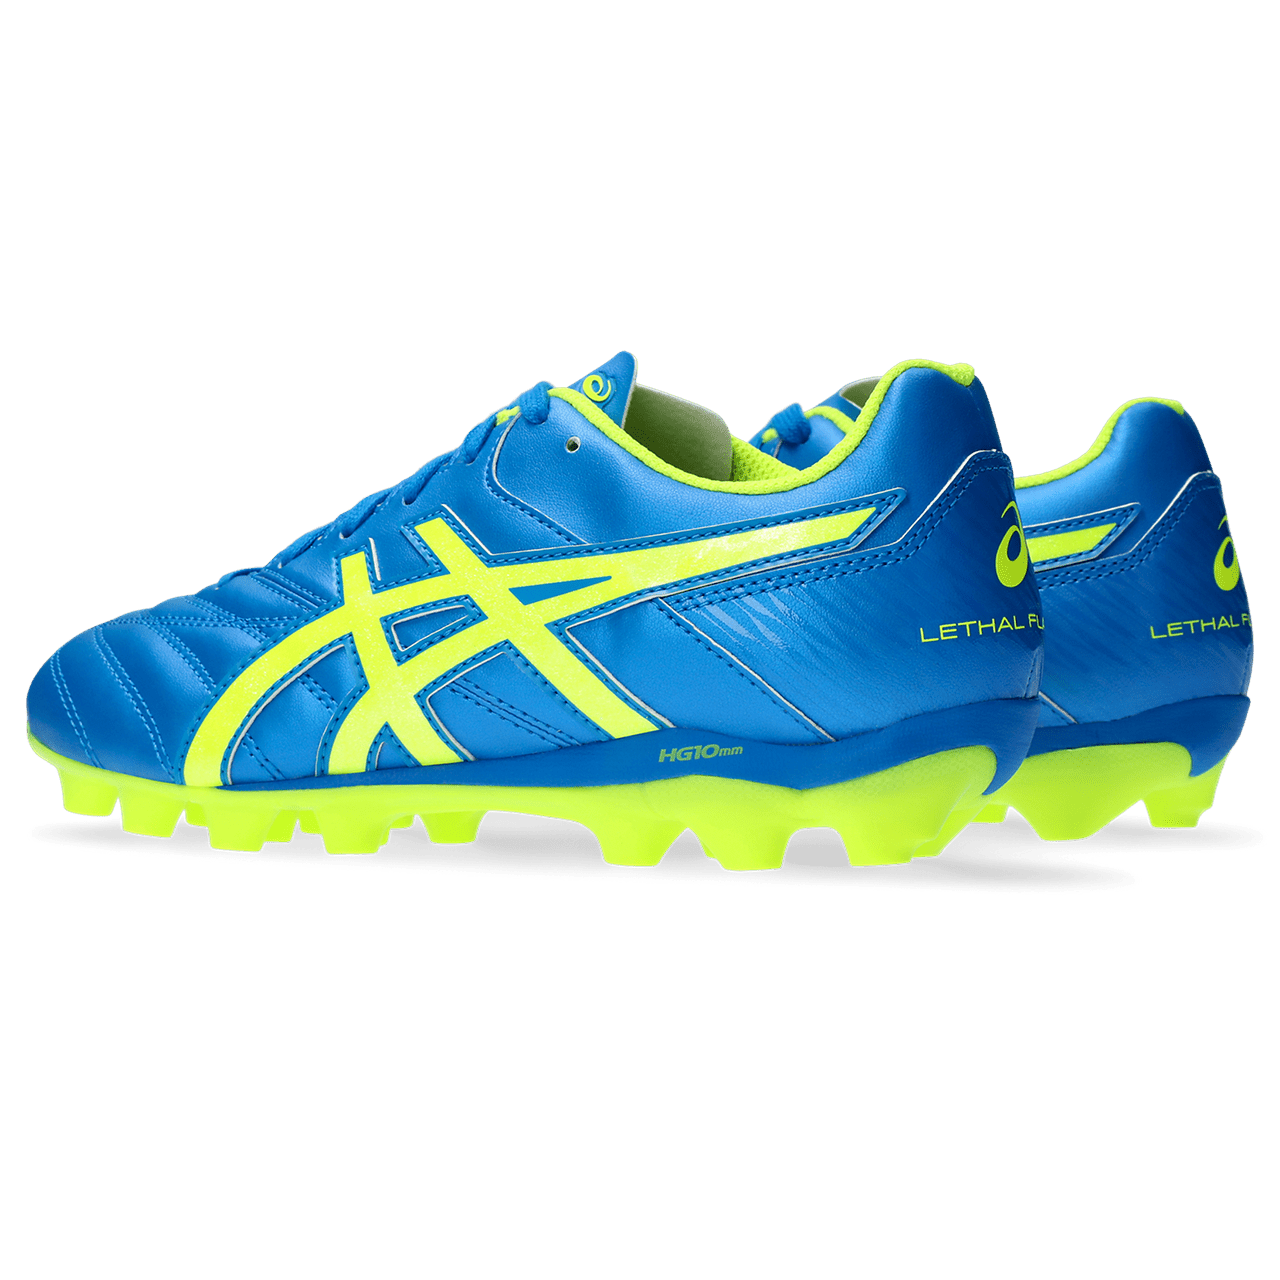 Asics Lethal Flash IT 2 GS Junior Football Boot ELECTRIC BLUE/YELLOW